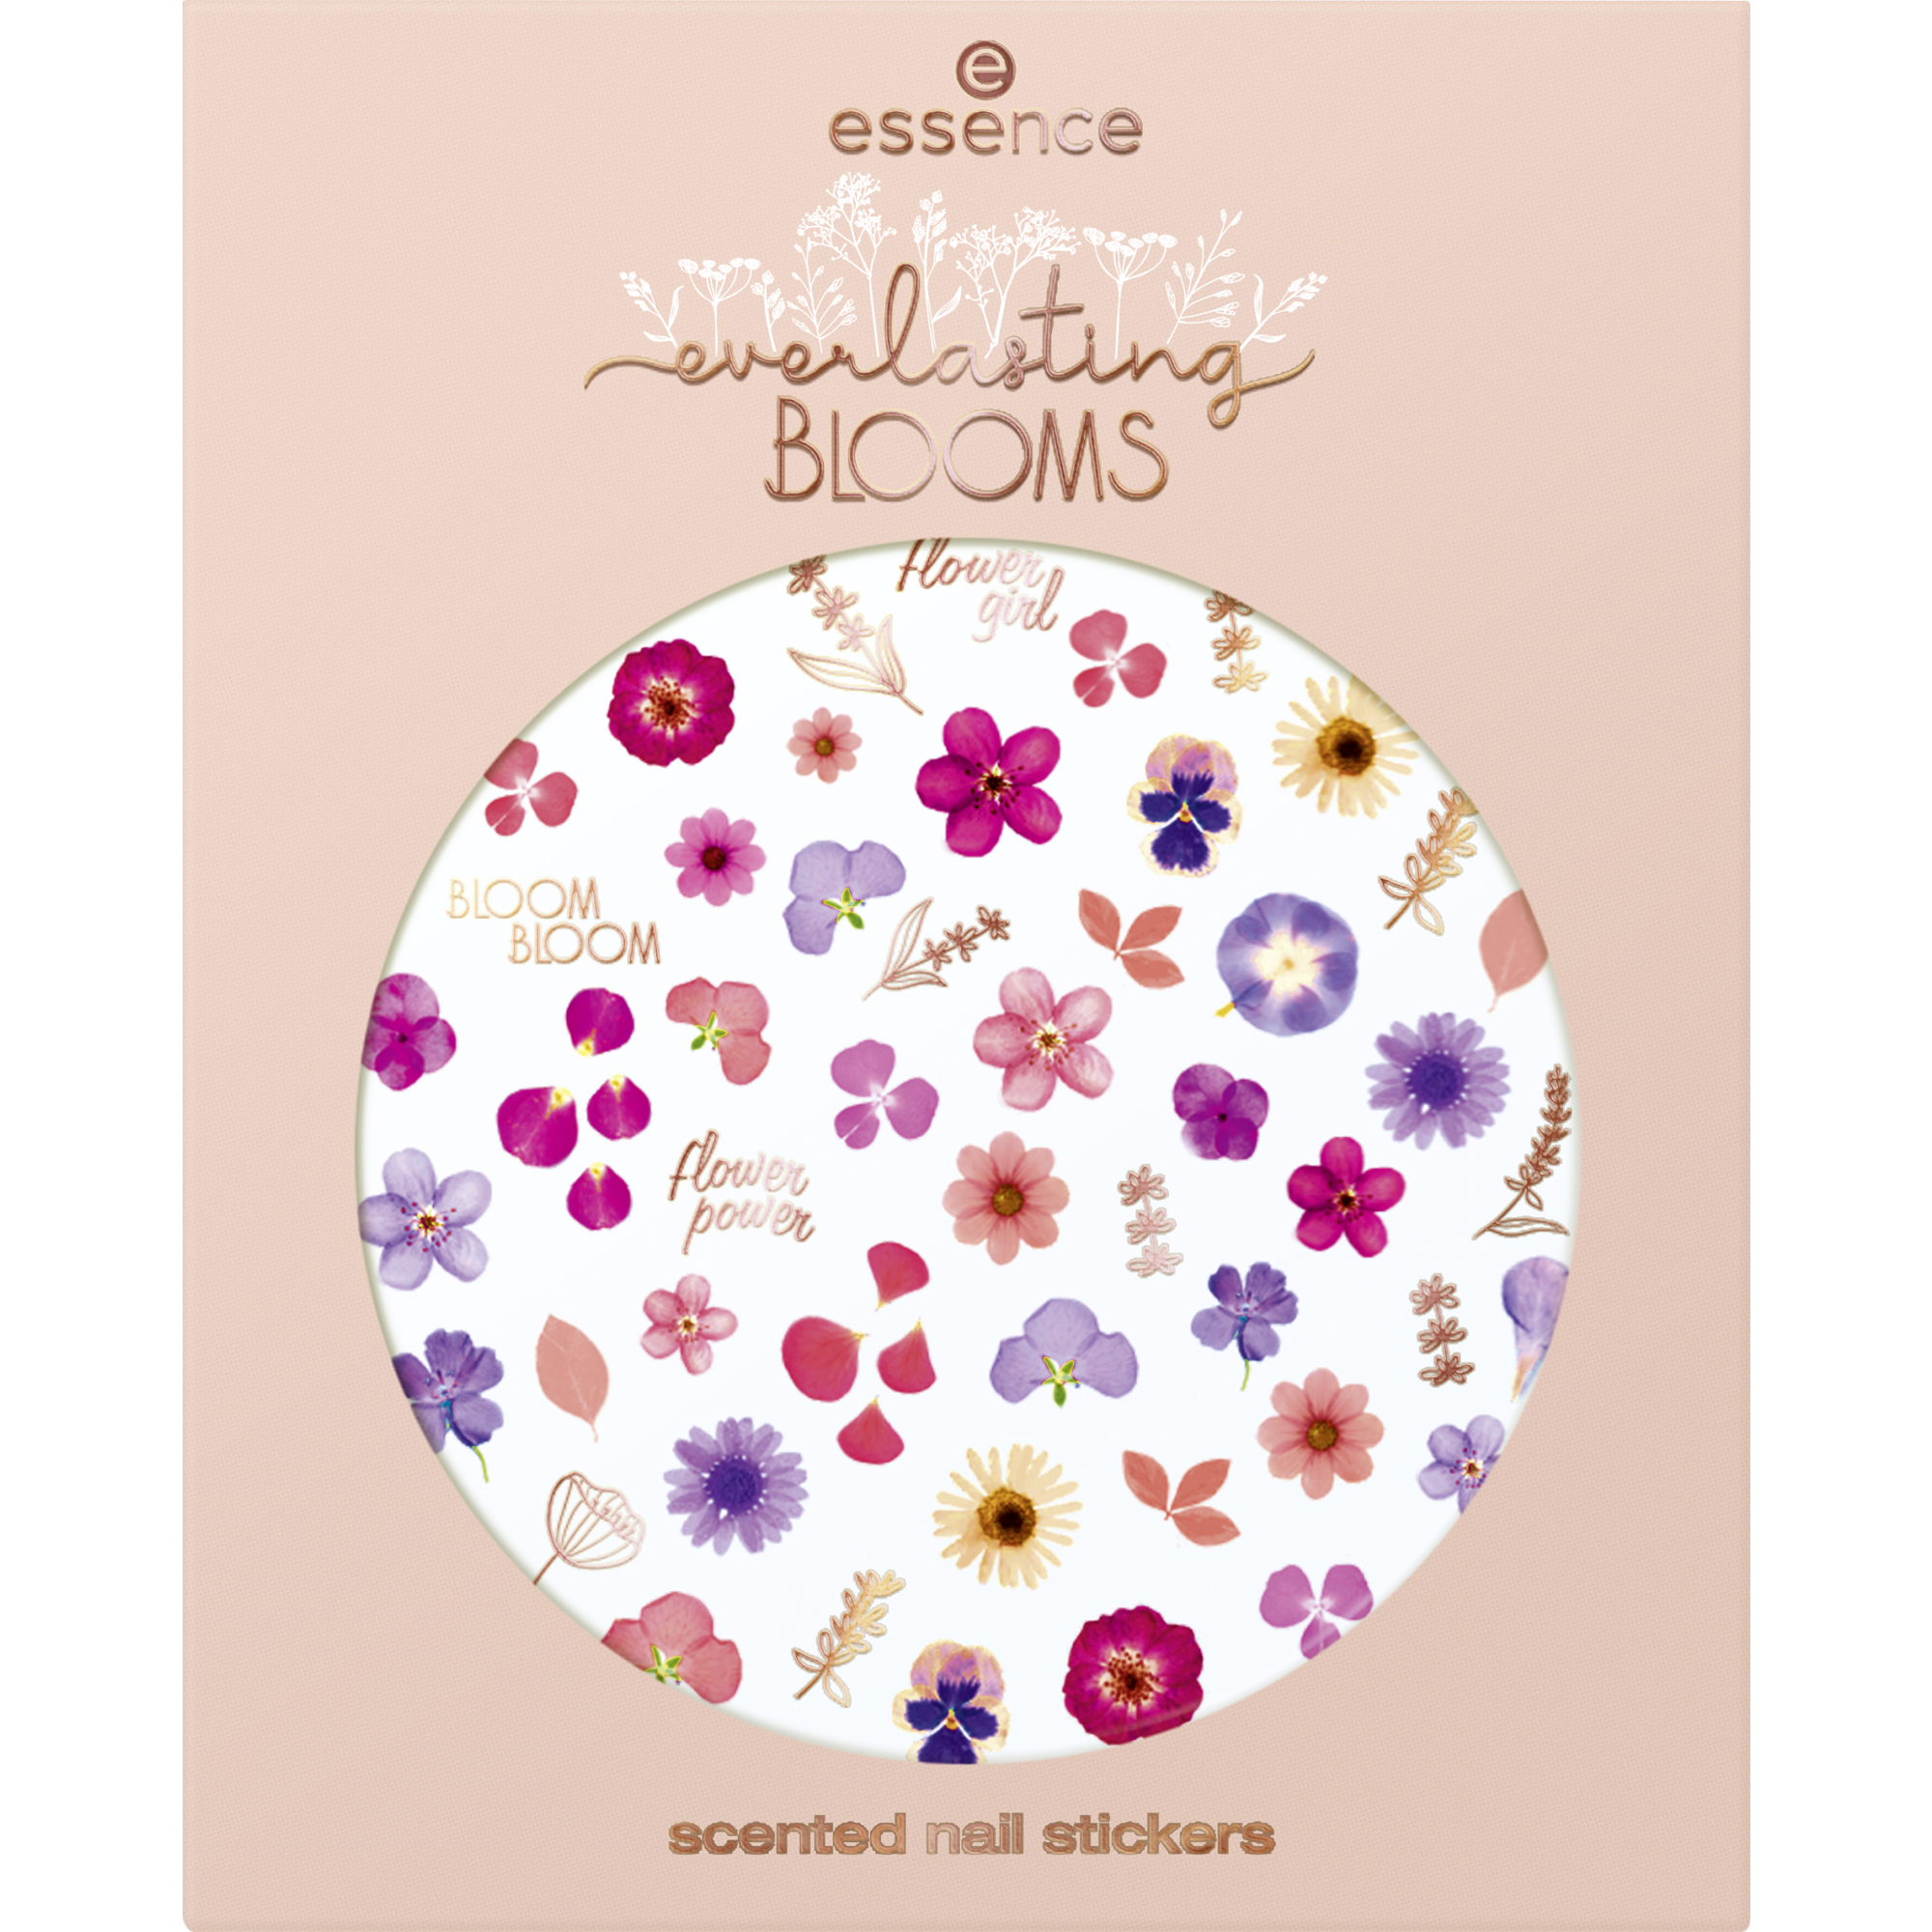 everlasting BLOOMS scented nail stickers